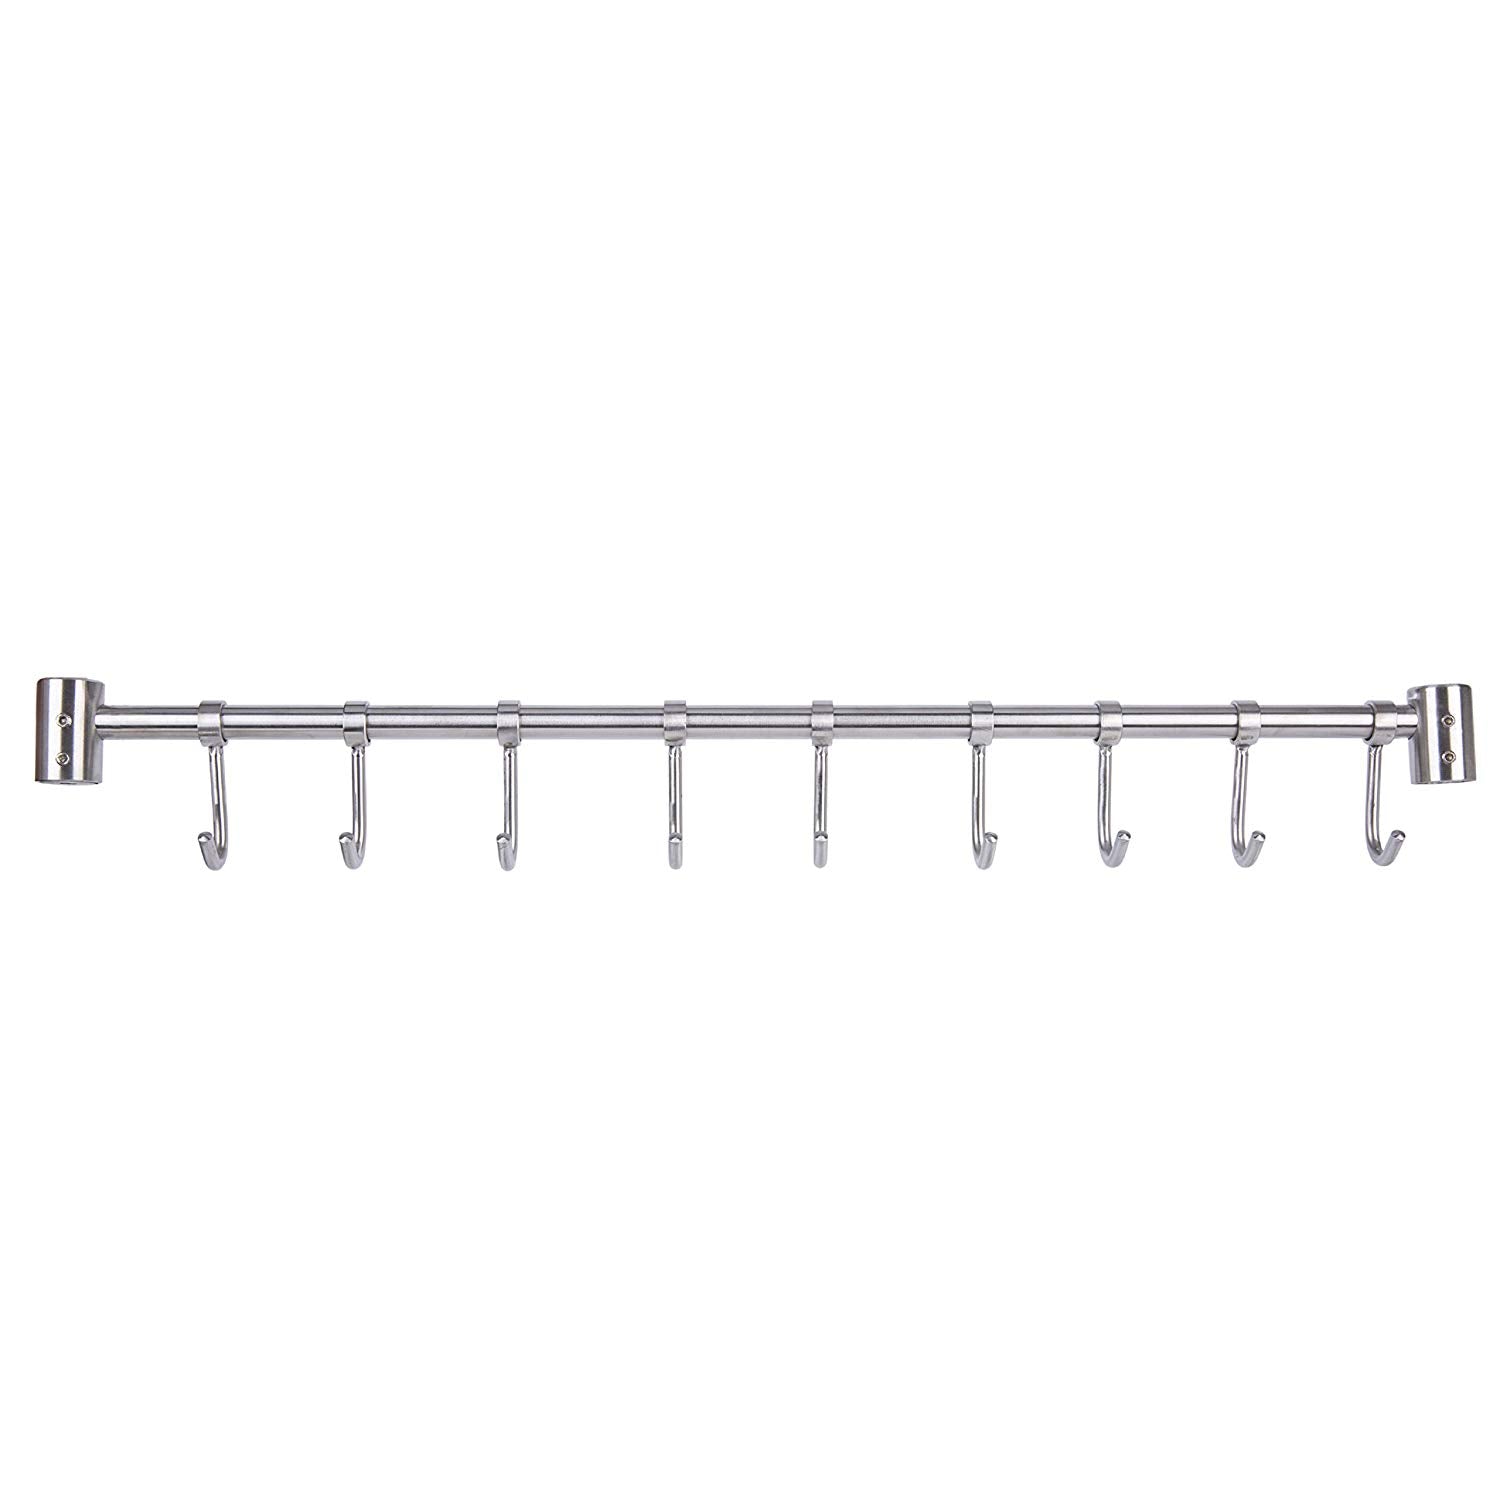 Lebather Kitchen Removable Utensil Rack with Hooks Wall Mount SUS304 Stainless Steel, Brushed Nickel (9 Hooks/19.5 Inch)